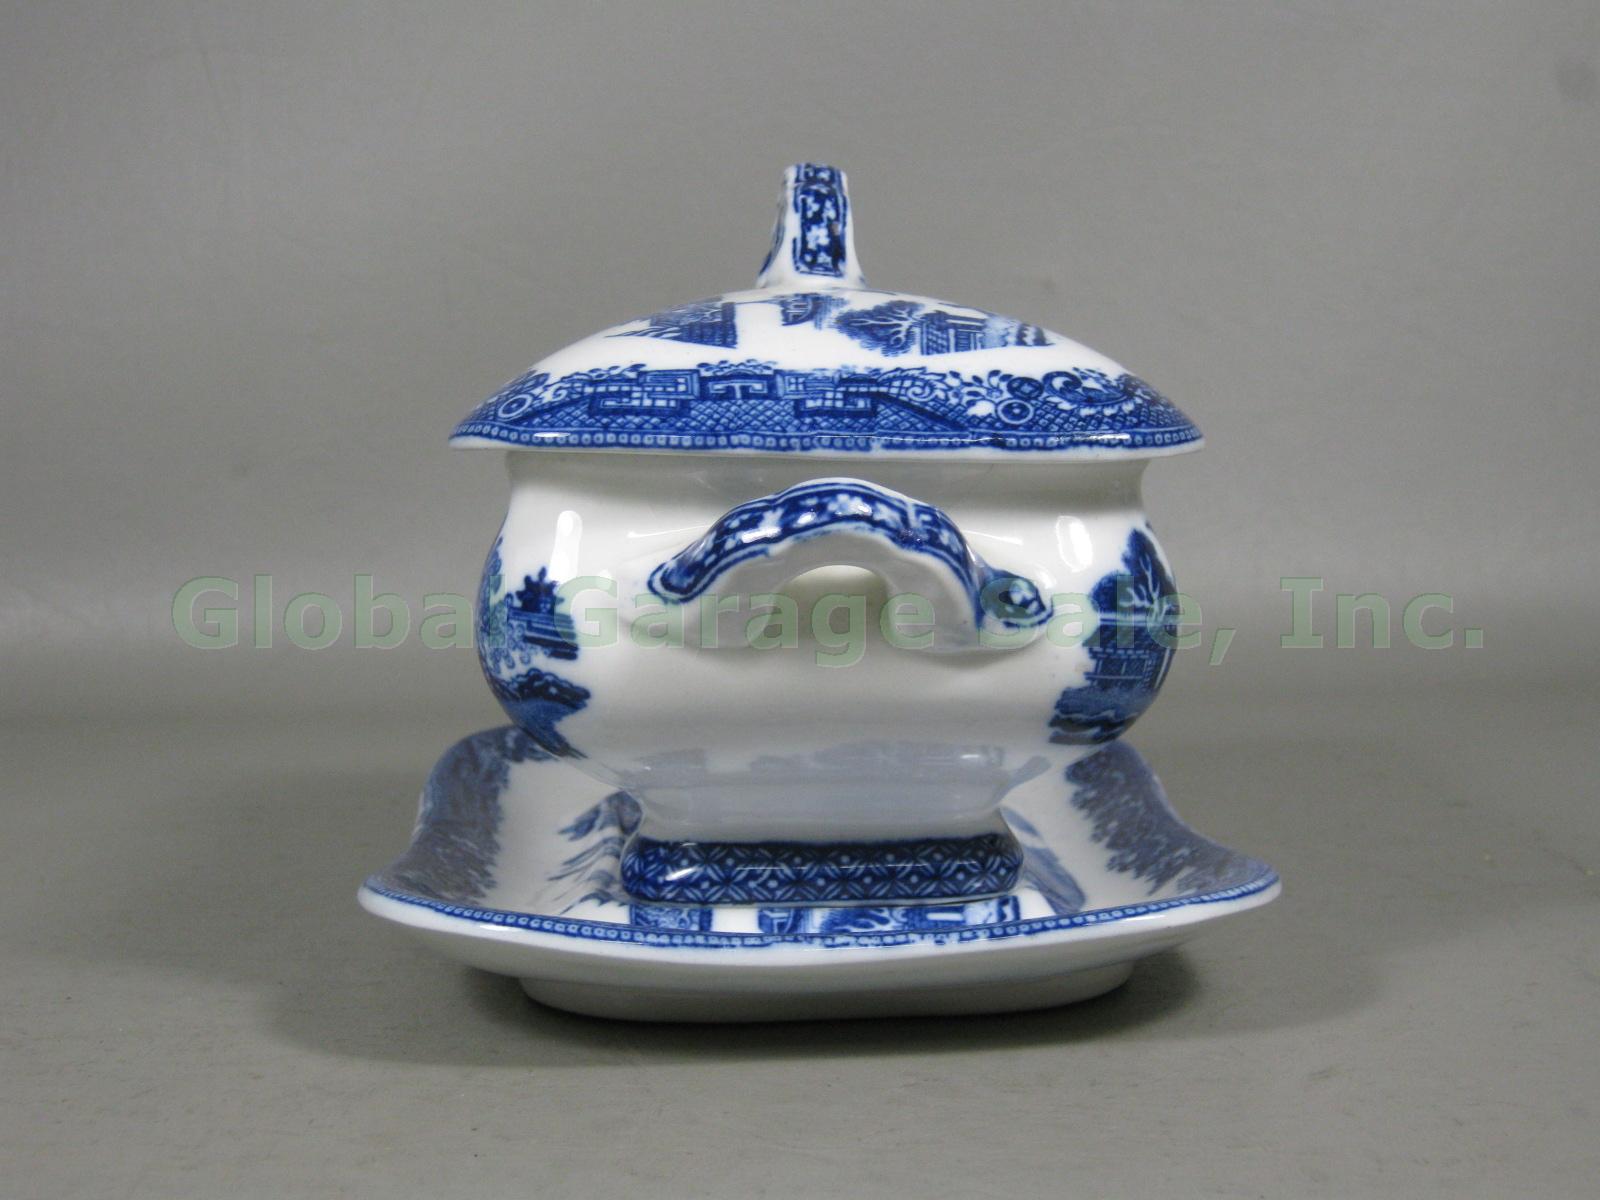 Vintage Antique Royal Doulton Blue Willow Soup Tureen With Underplate & Ladle NR 4